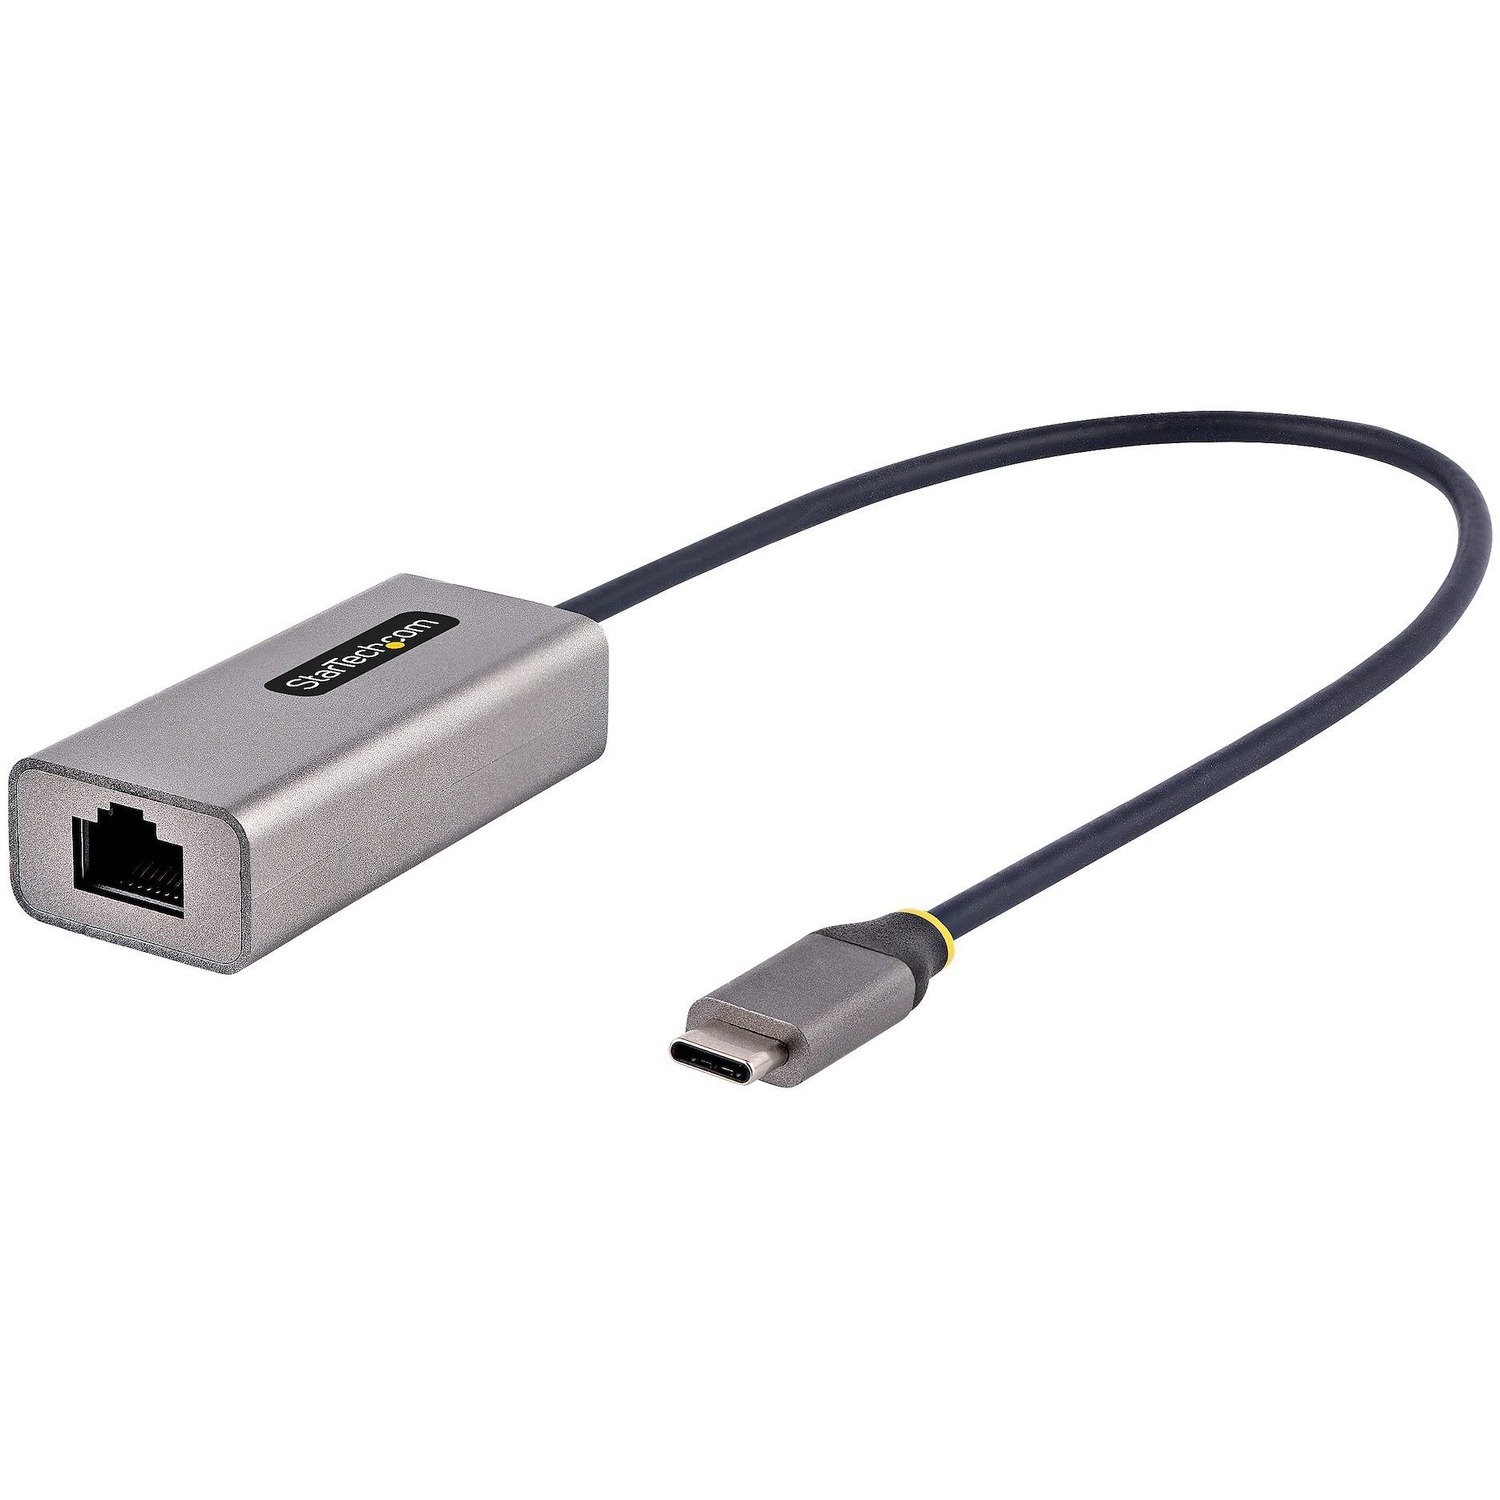 StarTech.com USB-C to Ethernet Adapter, 10/100/1000 Mbps, Gigabit Network Adapter, ASIX AX88179A, 1ft/30cm Cable, Windows/macOS/Linux